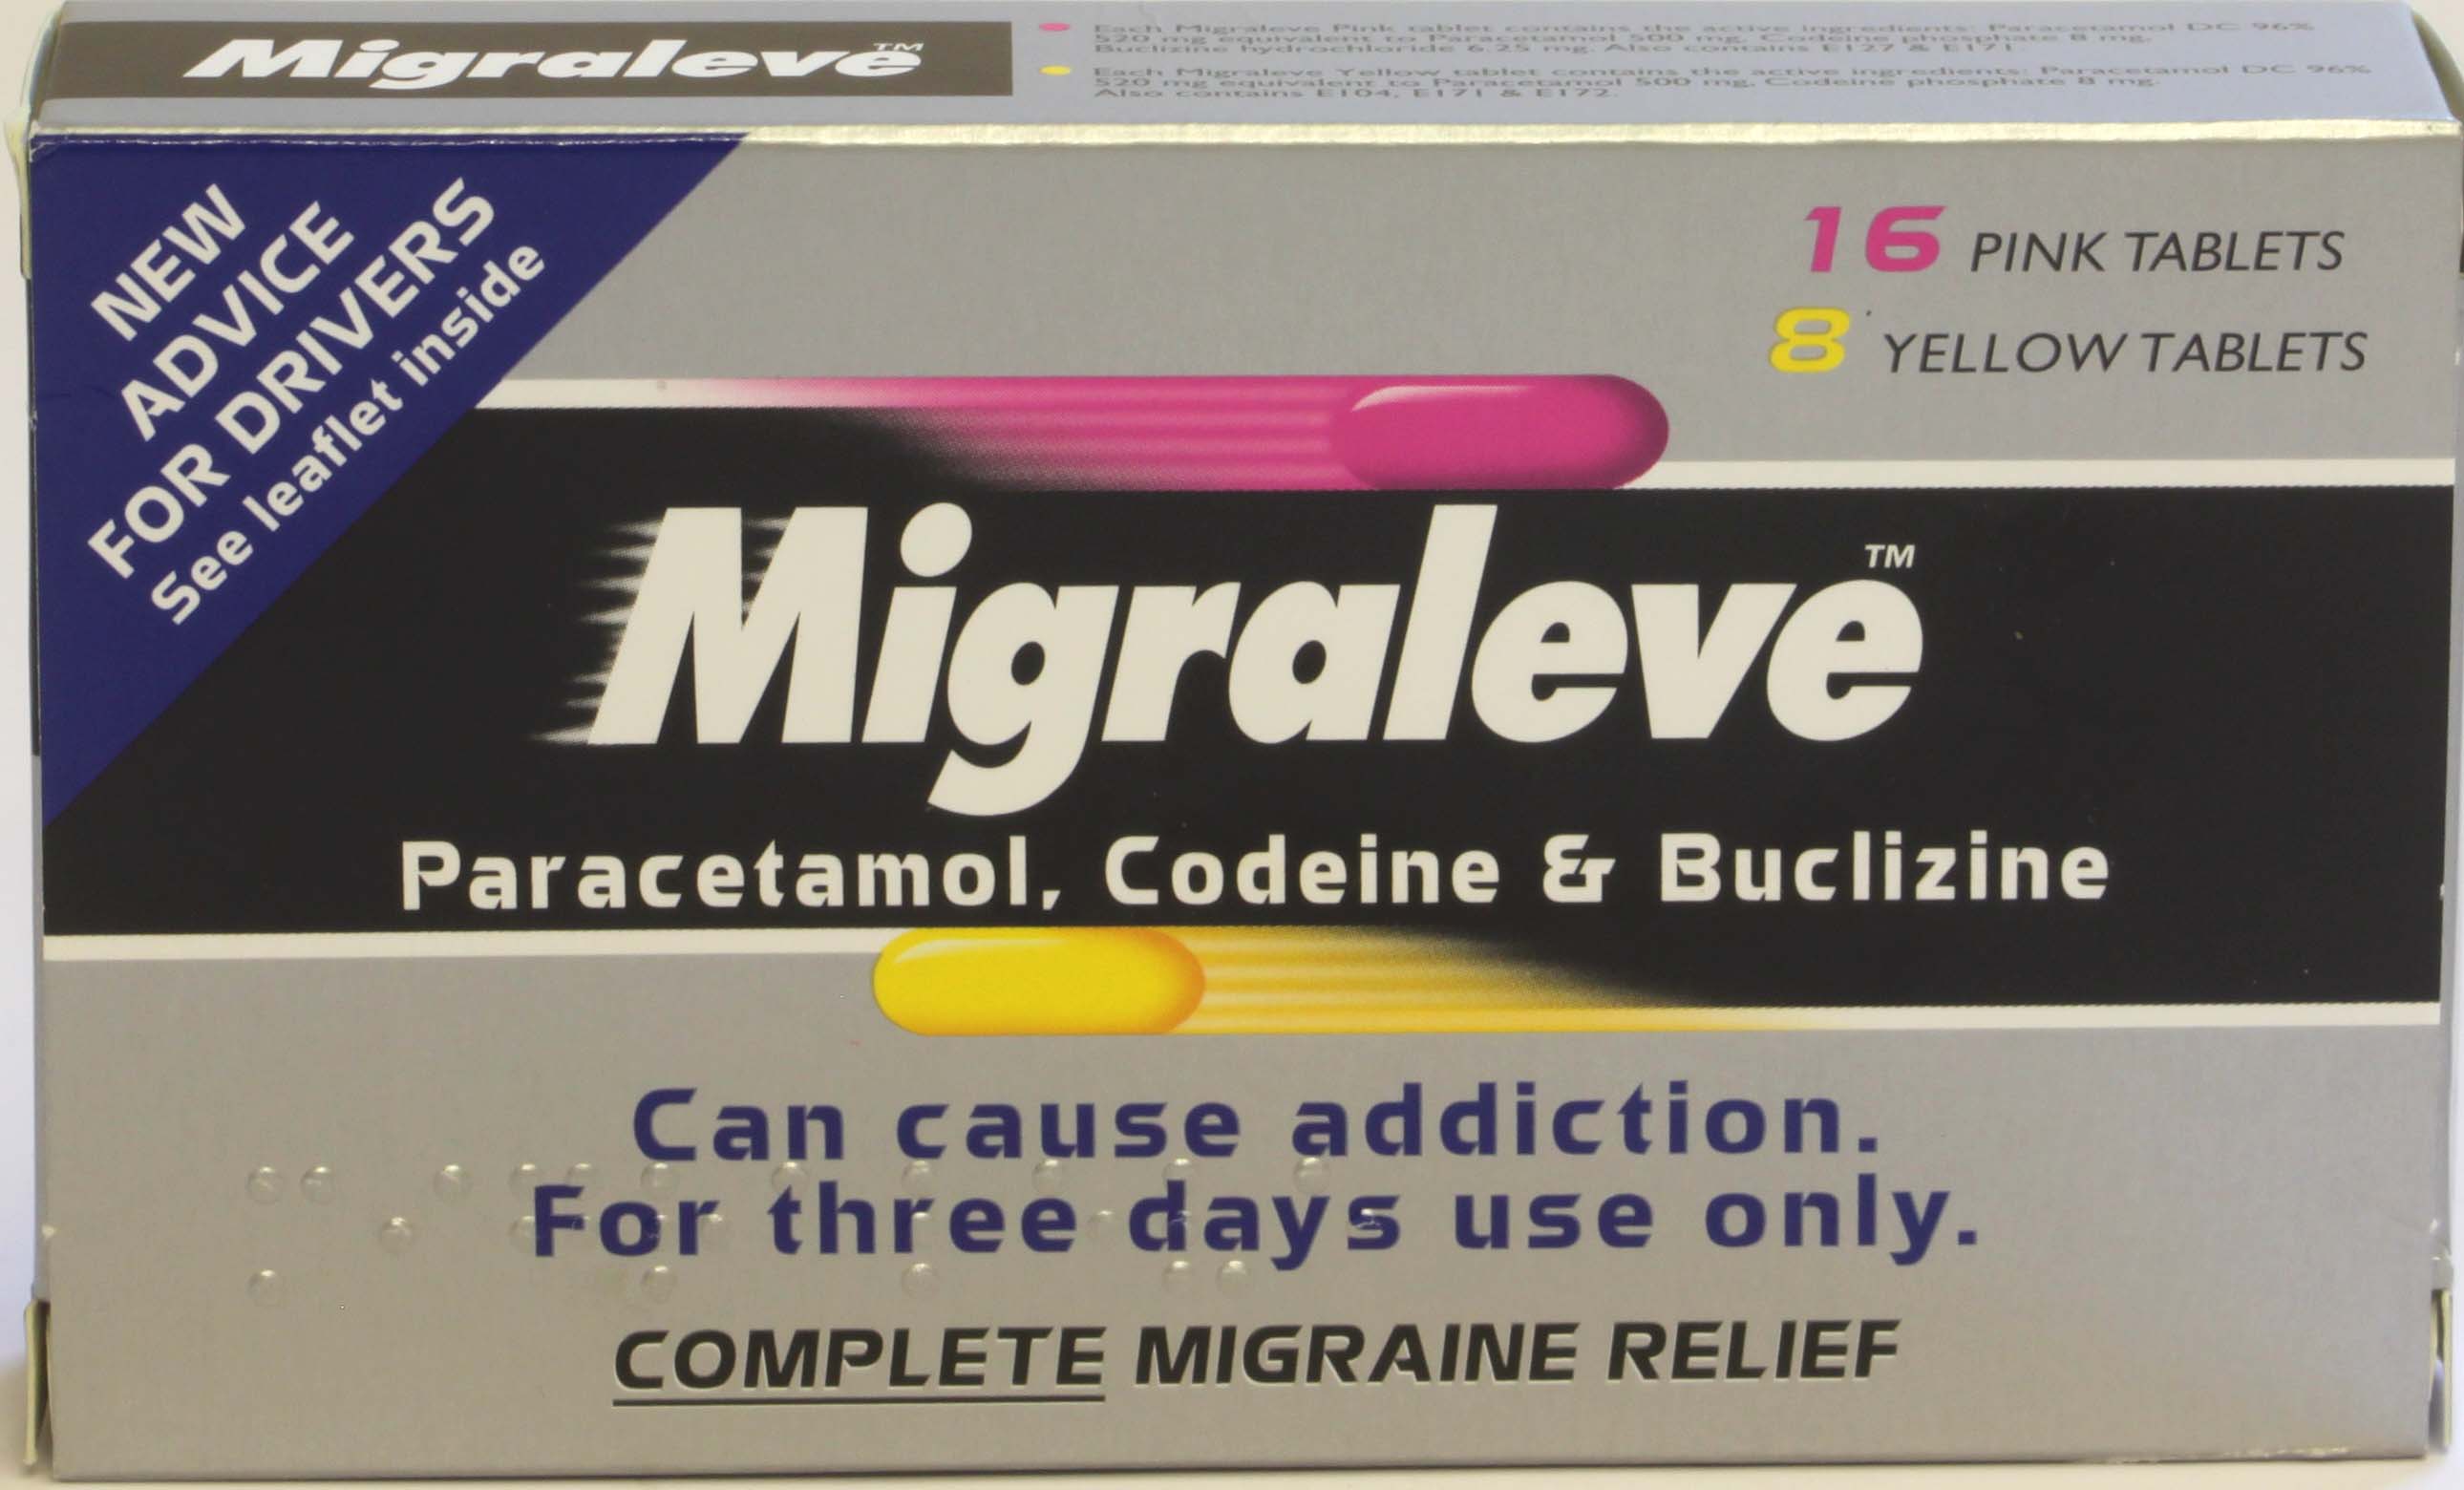 Migraleve 16 Pink & 8 Yellow Tablets